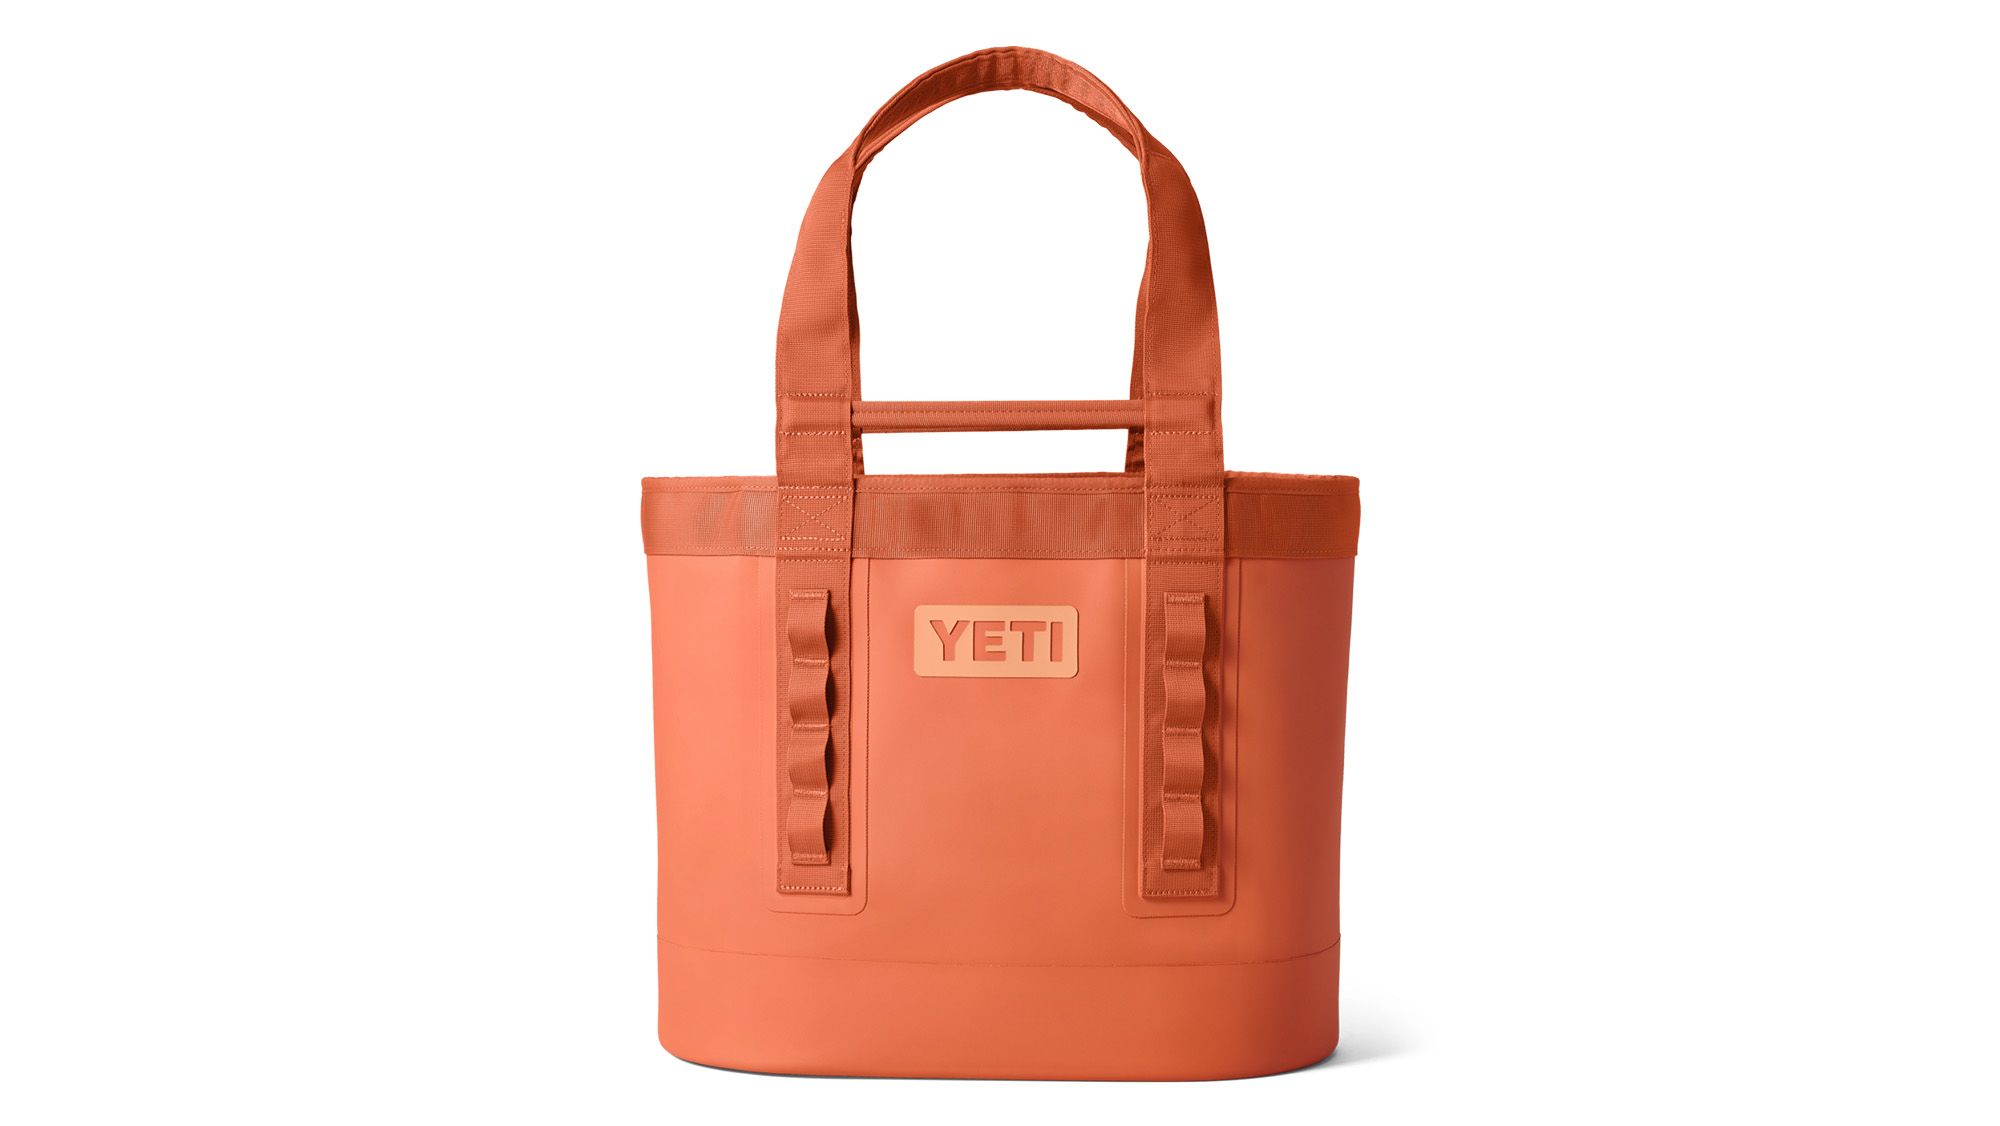 Yeti Kicks off Spring with New Products and Color Updates